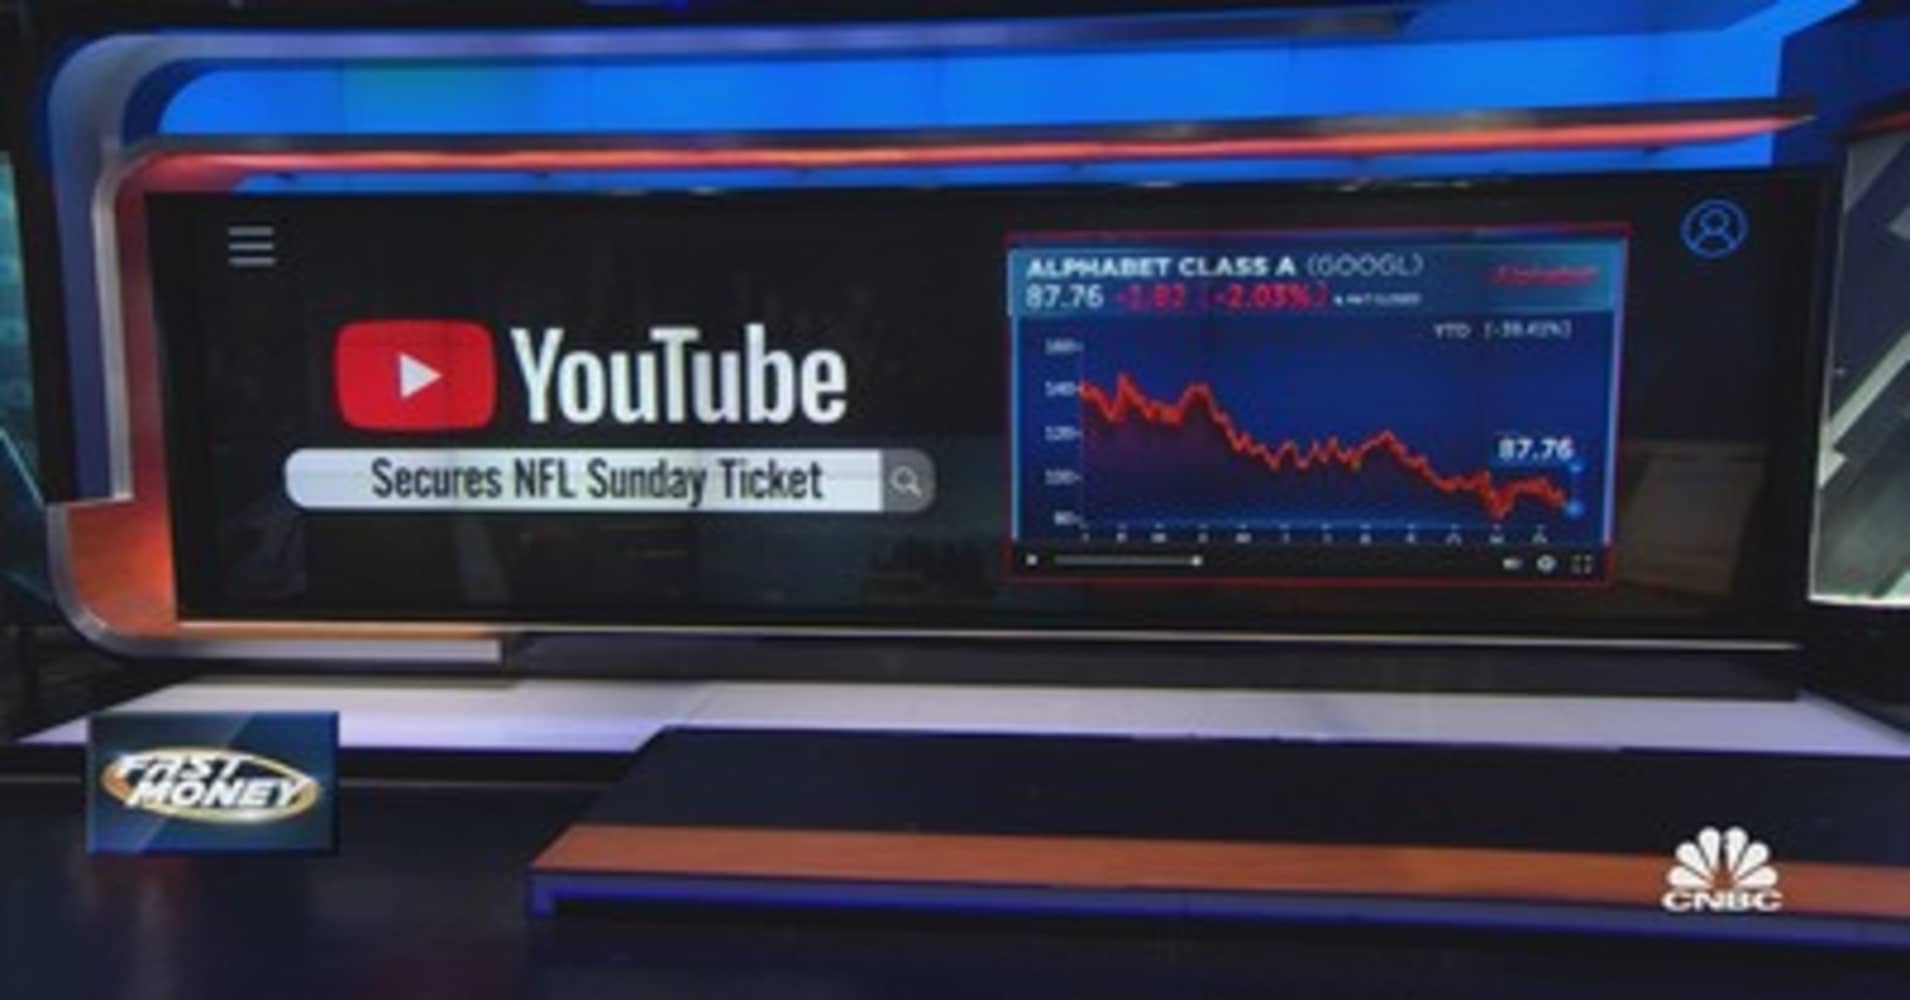 nfl sunday ticket tv sign in